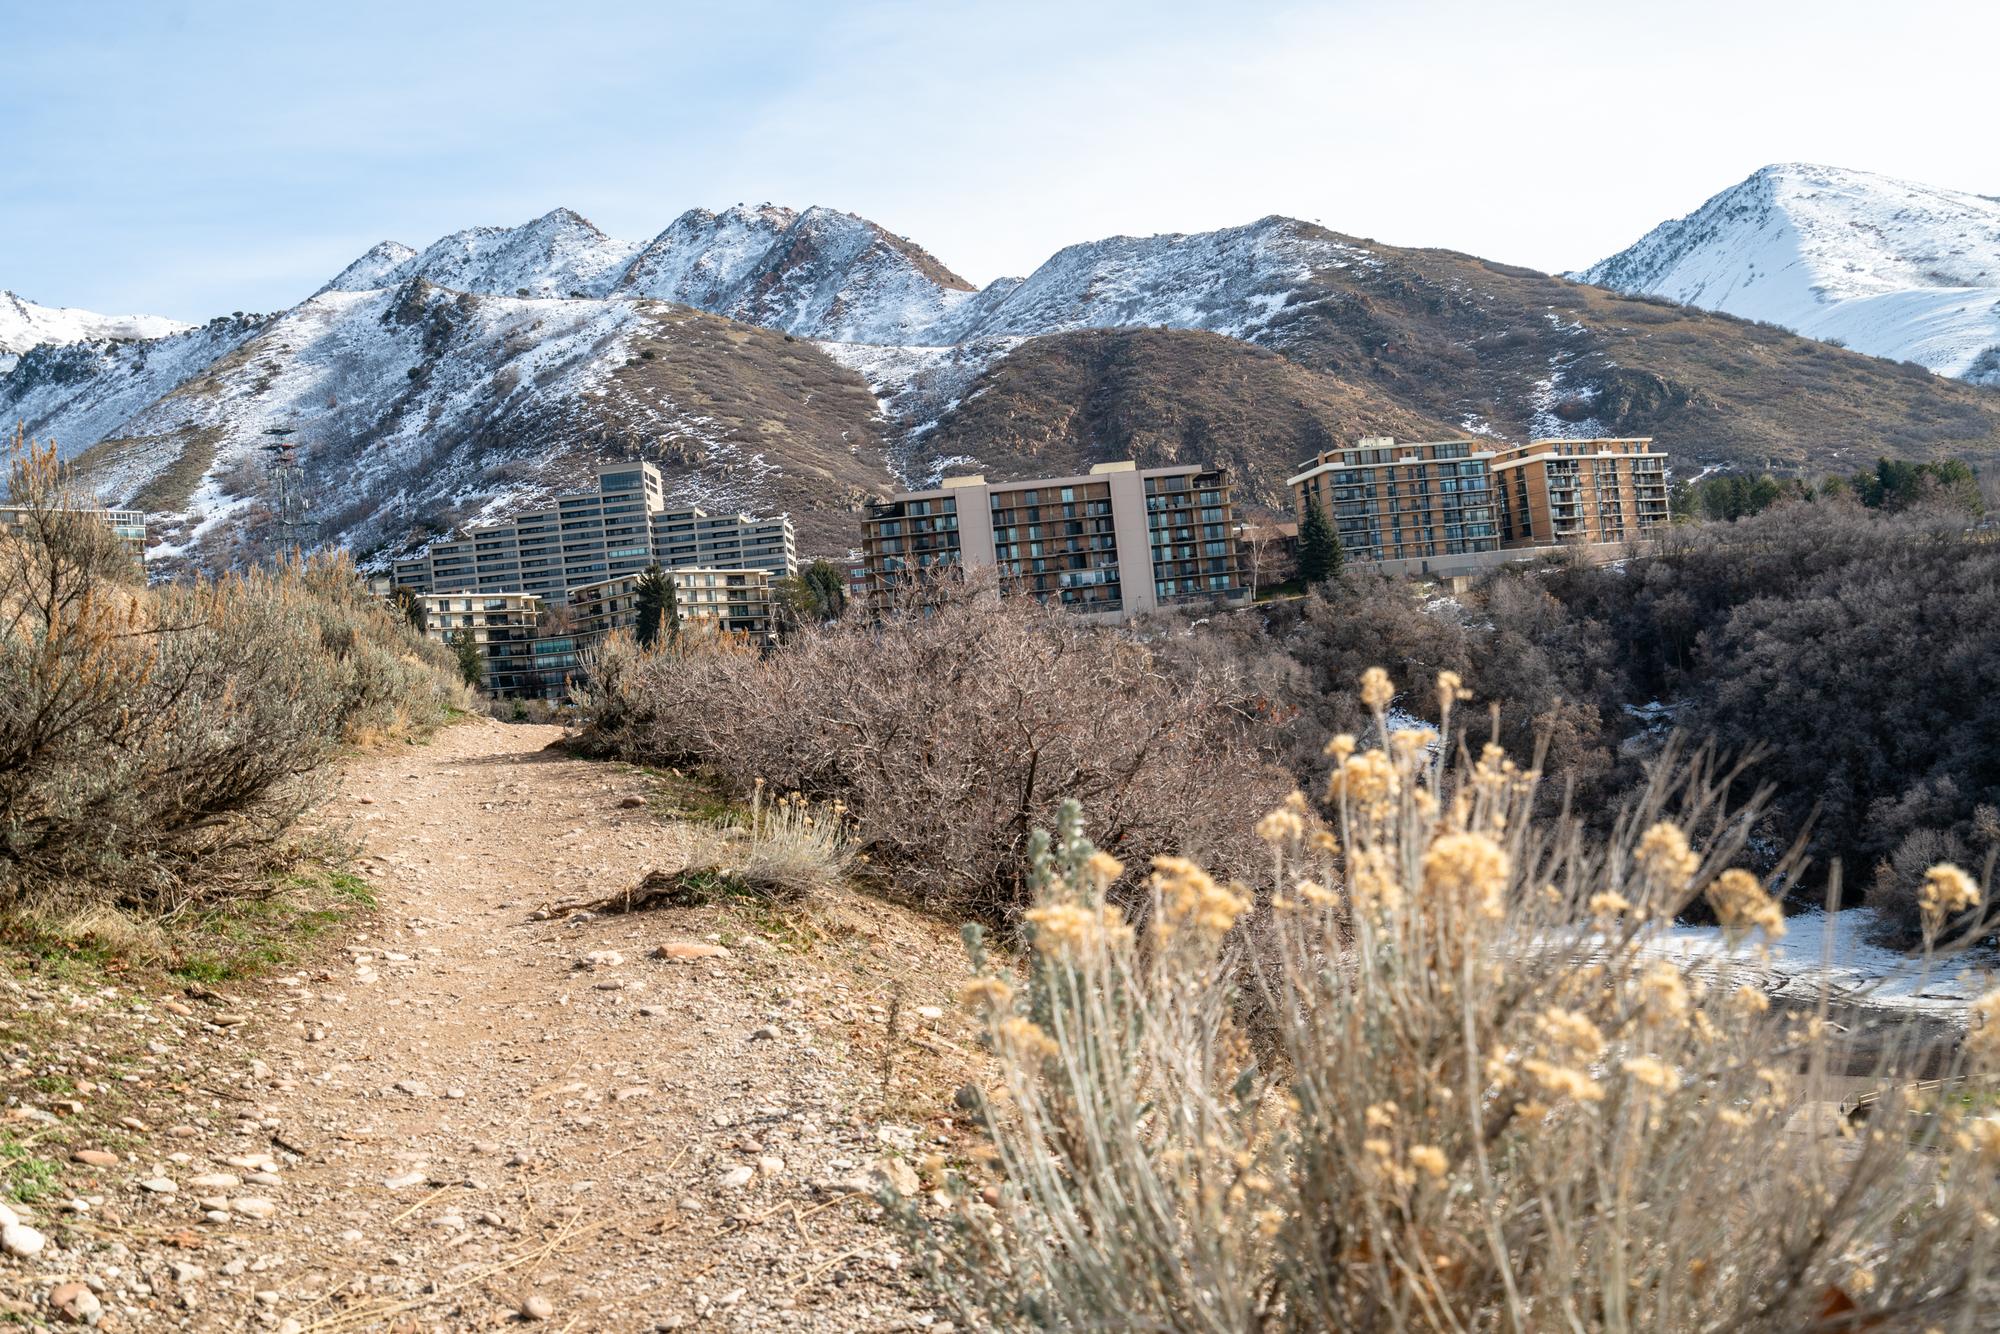 Heading up the Wagner Spring Trail with a view of buildings at the mouth of Emigration Canyon.